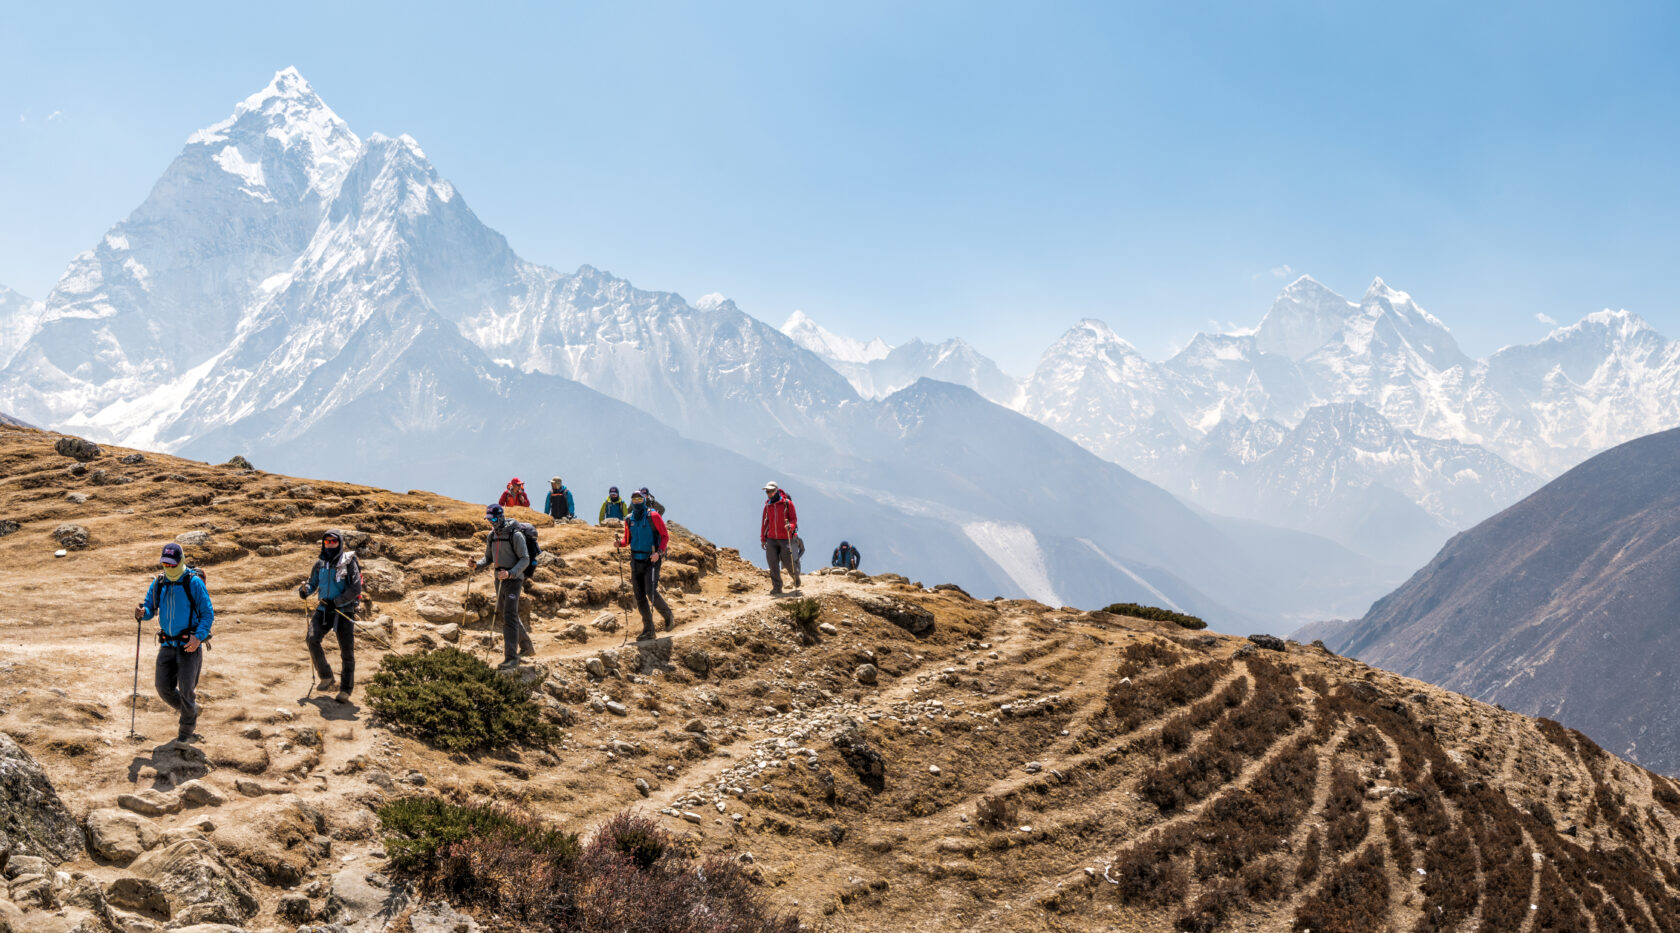 Small group of hikers at Dingboche, Nepal.